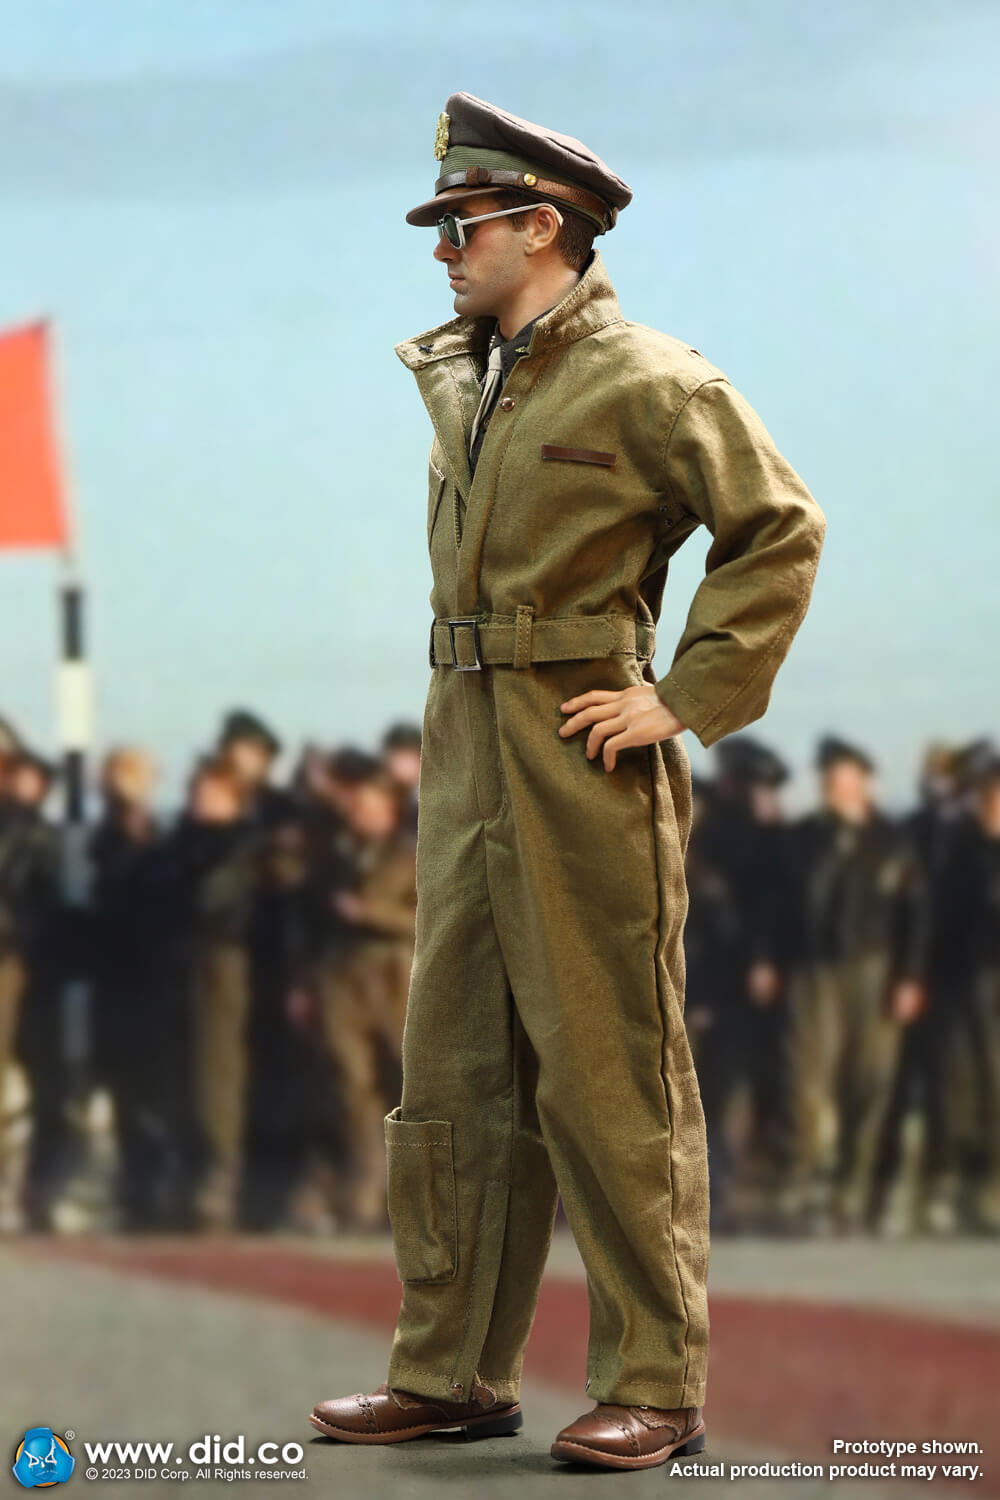 Historical - NEW PRODUCT: DiD: A80167 WWII United States Army Air Forces Pilot – Captain Rafe 3518